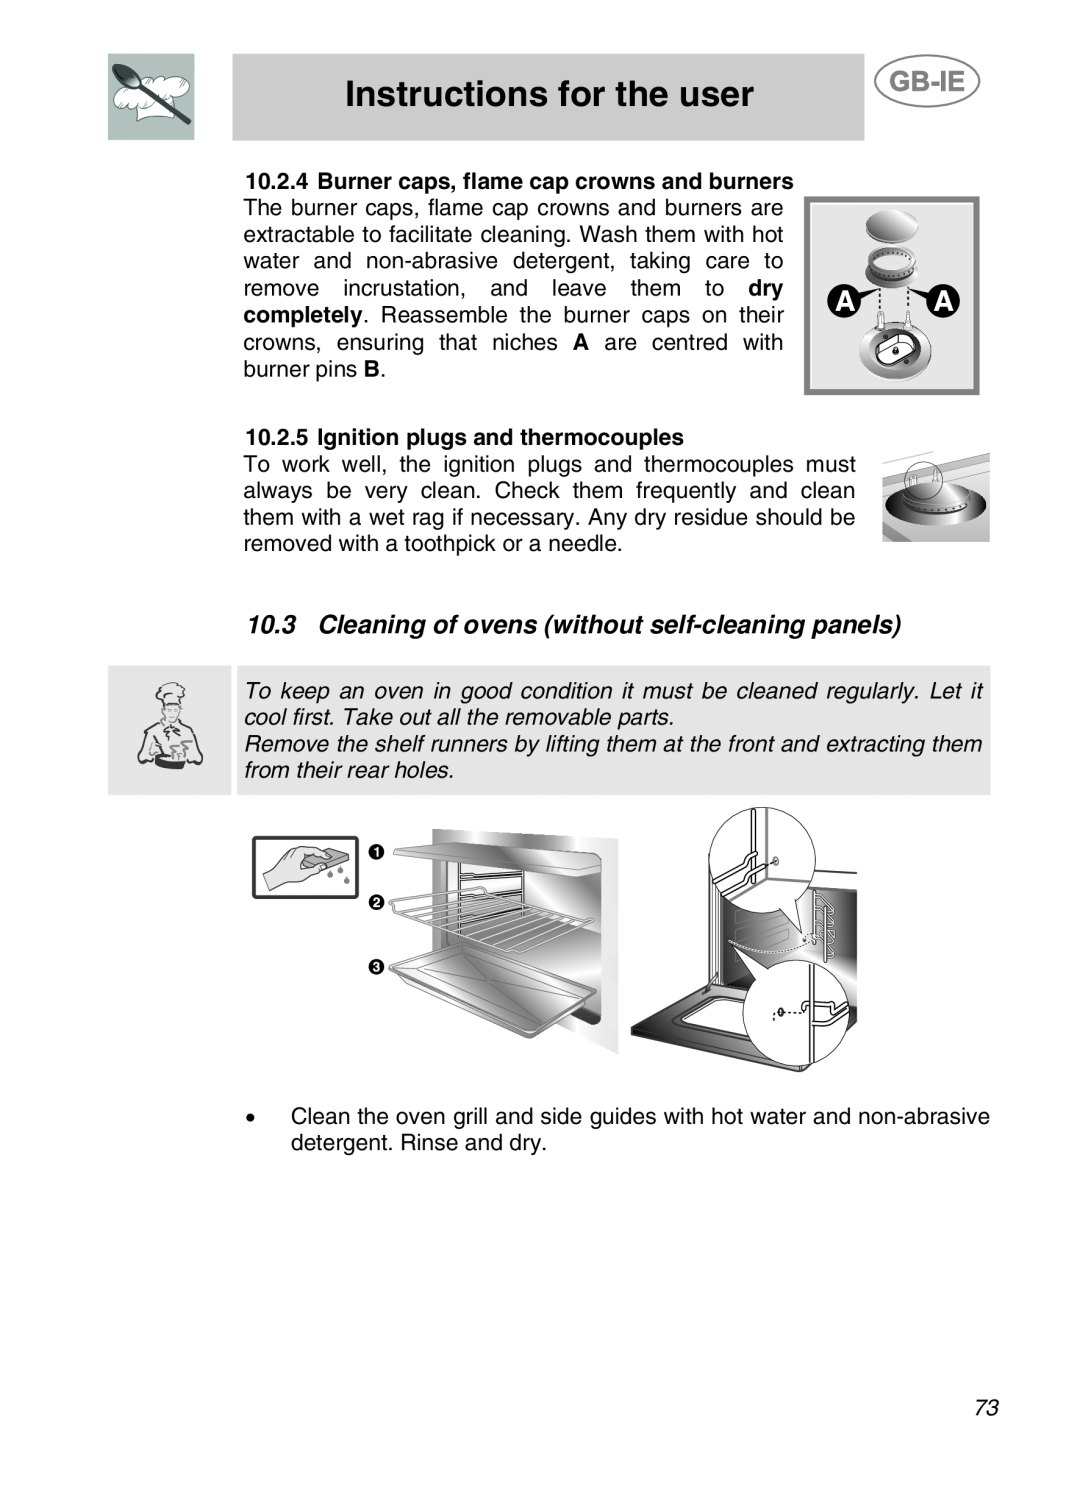 Smeg CS120A-6 Cleaning of ovens without self-cleaning panels, Instructions for the user, Ignition plugs and thermocouples 